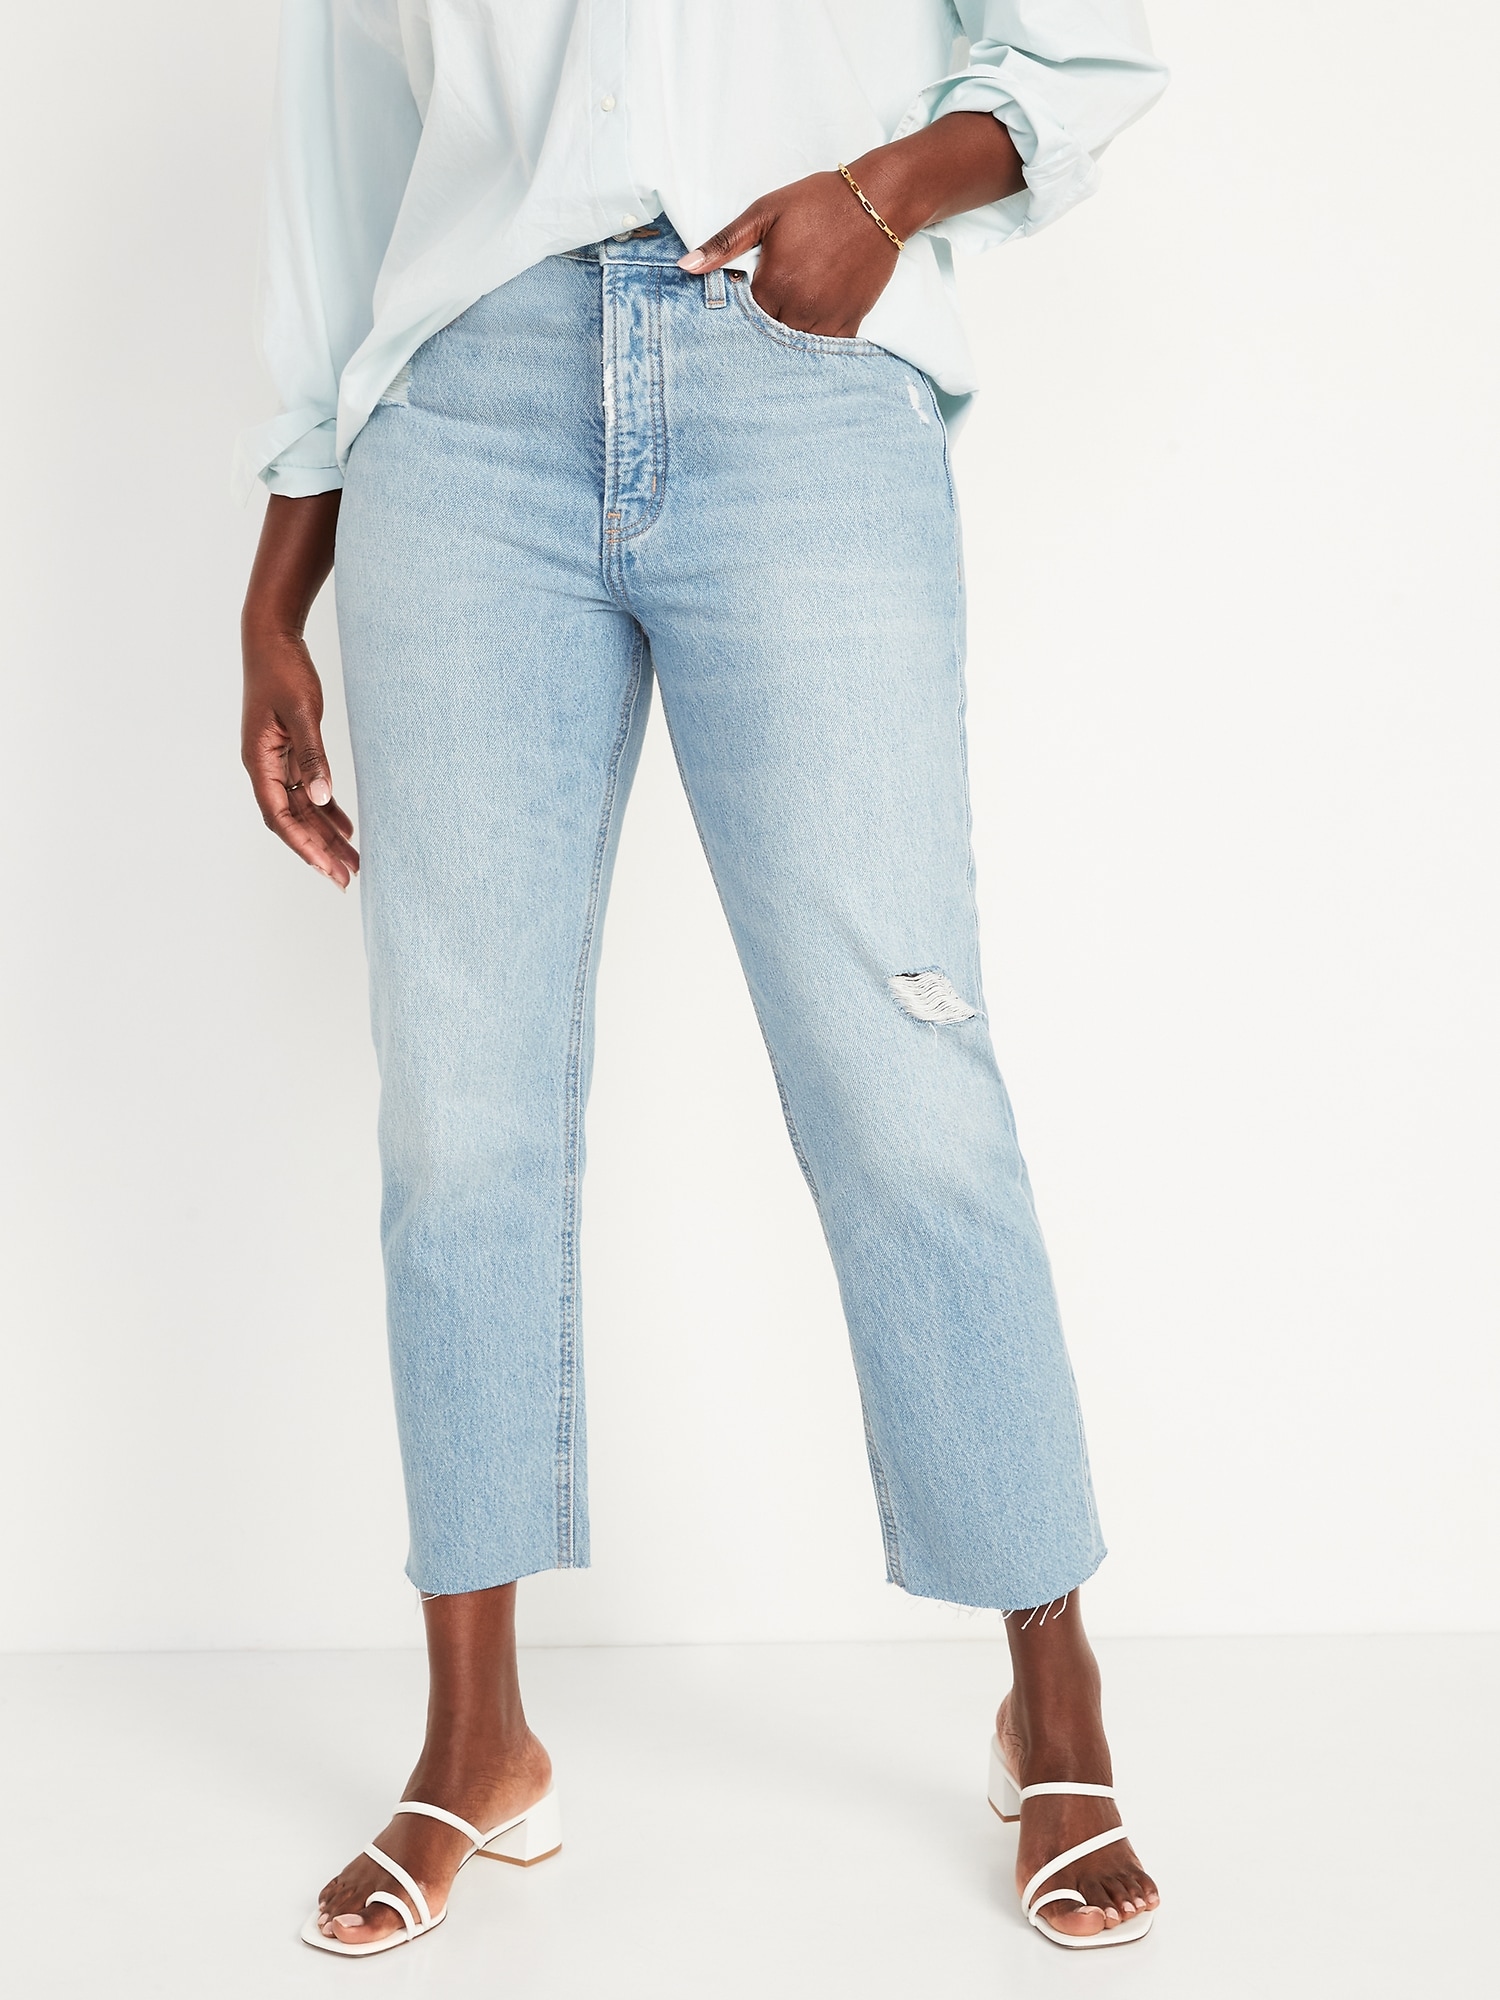 Extra High-Waisted Button-Fly Sky-Hi Straight Non-Stretch Cut-Off Jeans ...